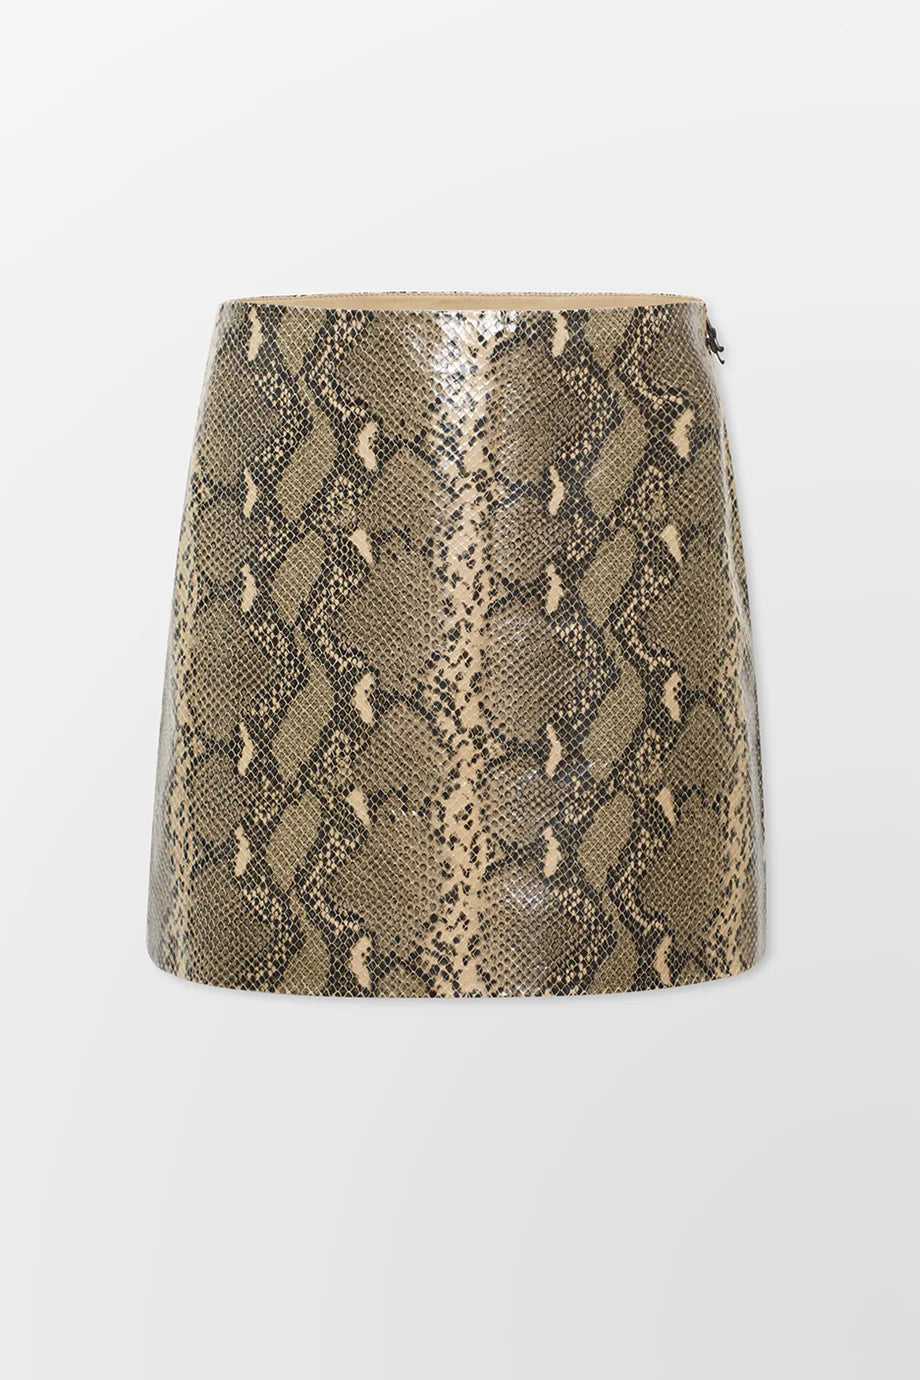 Elodie Faux Leather Snakeskin Skirt